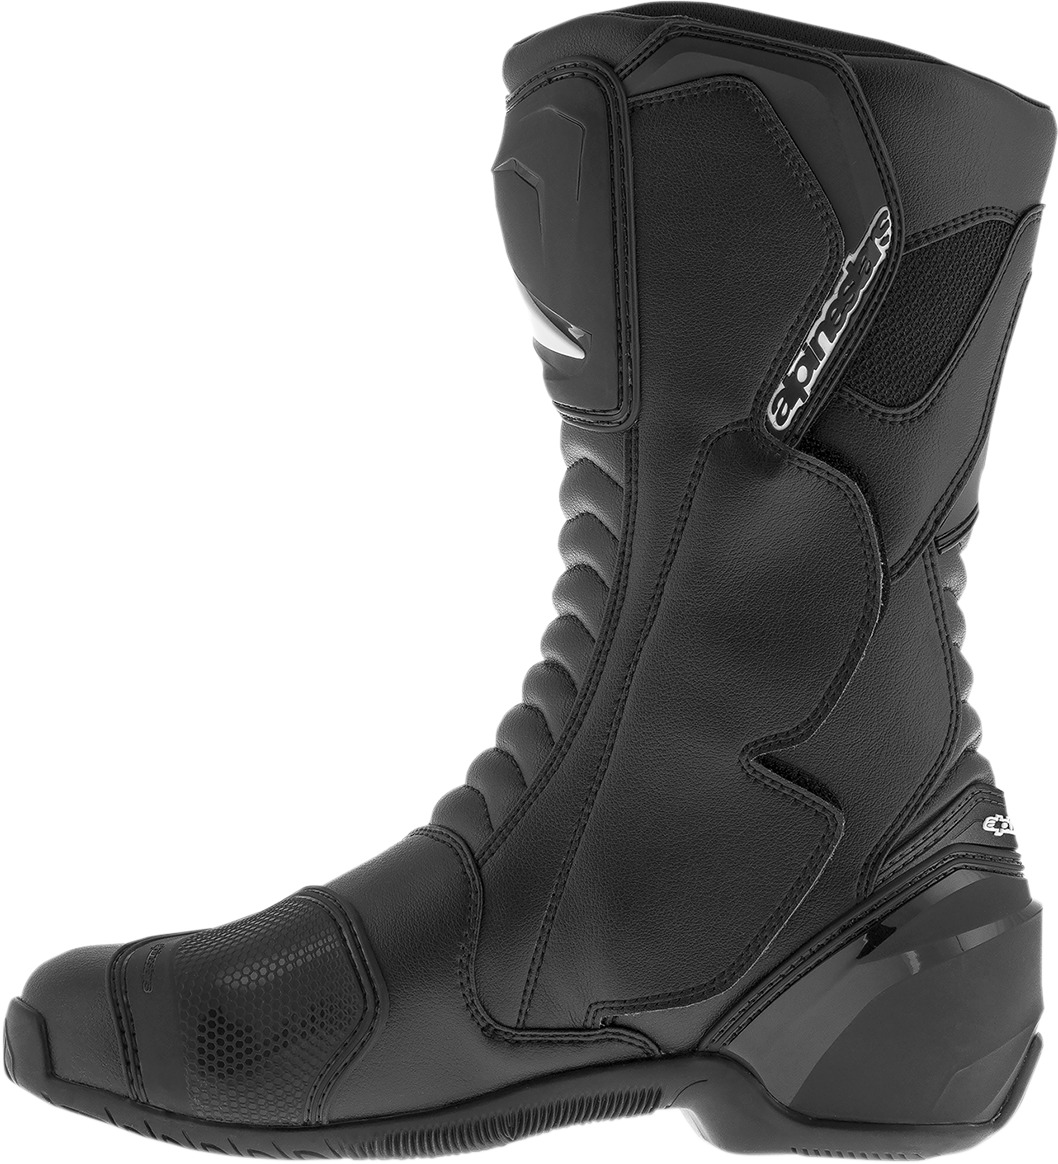 SMX-S Waterproof Street Riding Boots Black US 14 - Click Image to Close